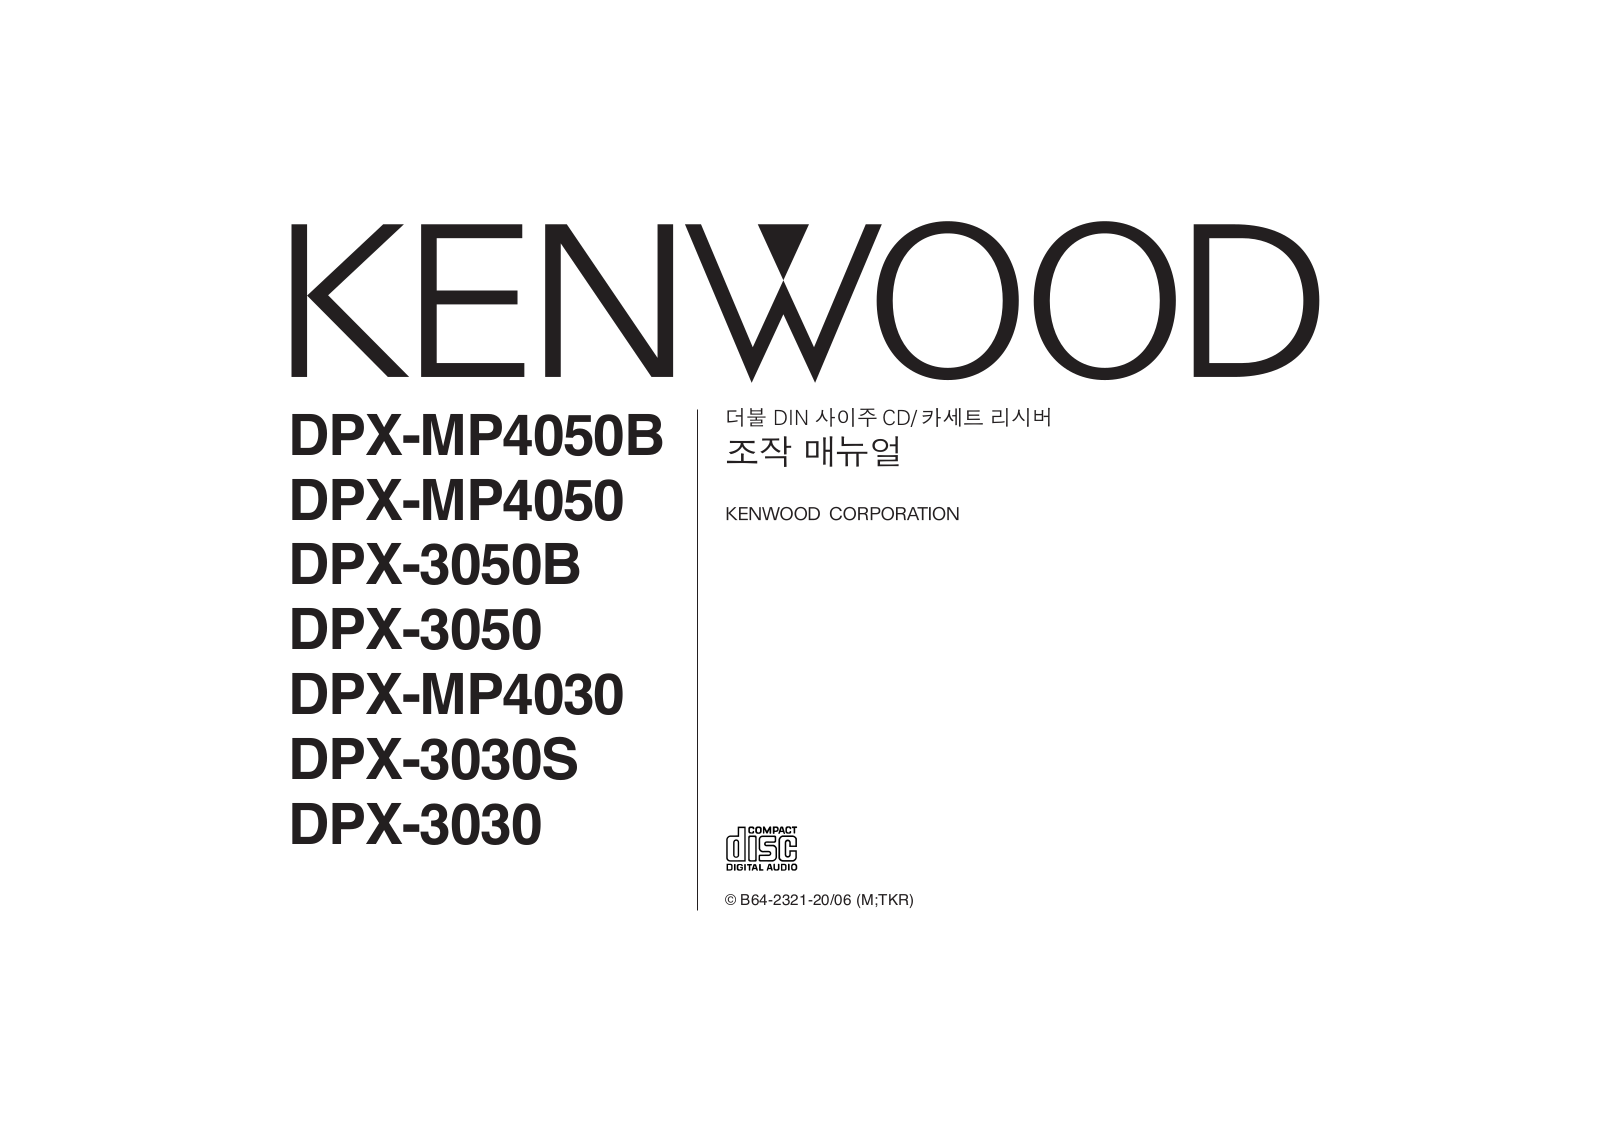 KENWOOD DPX-MP4030, DPX-MP4050, DPX-MP4050B, DPX-3050B, DPX-3030S User Manual